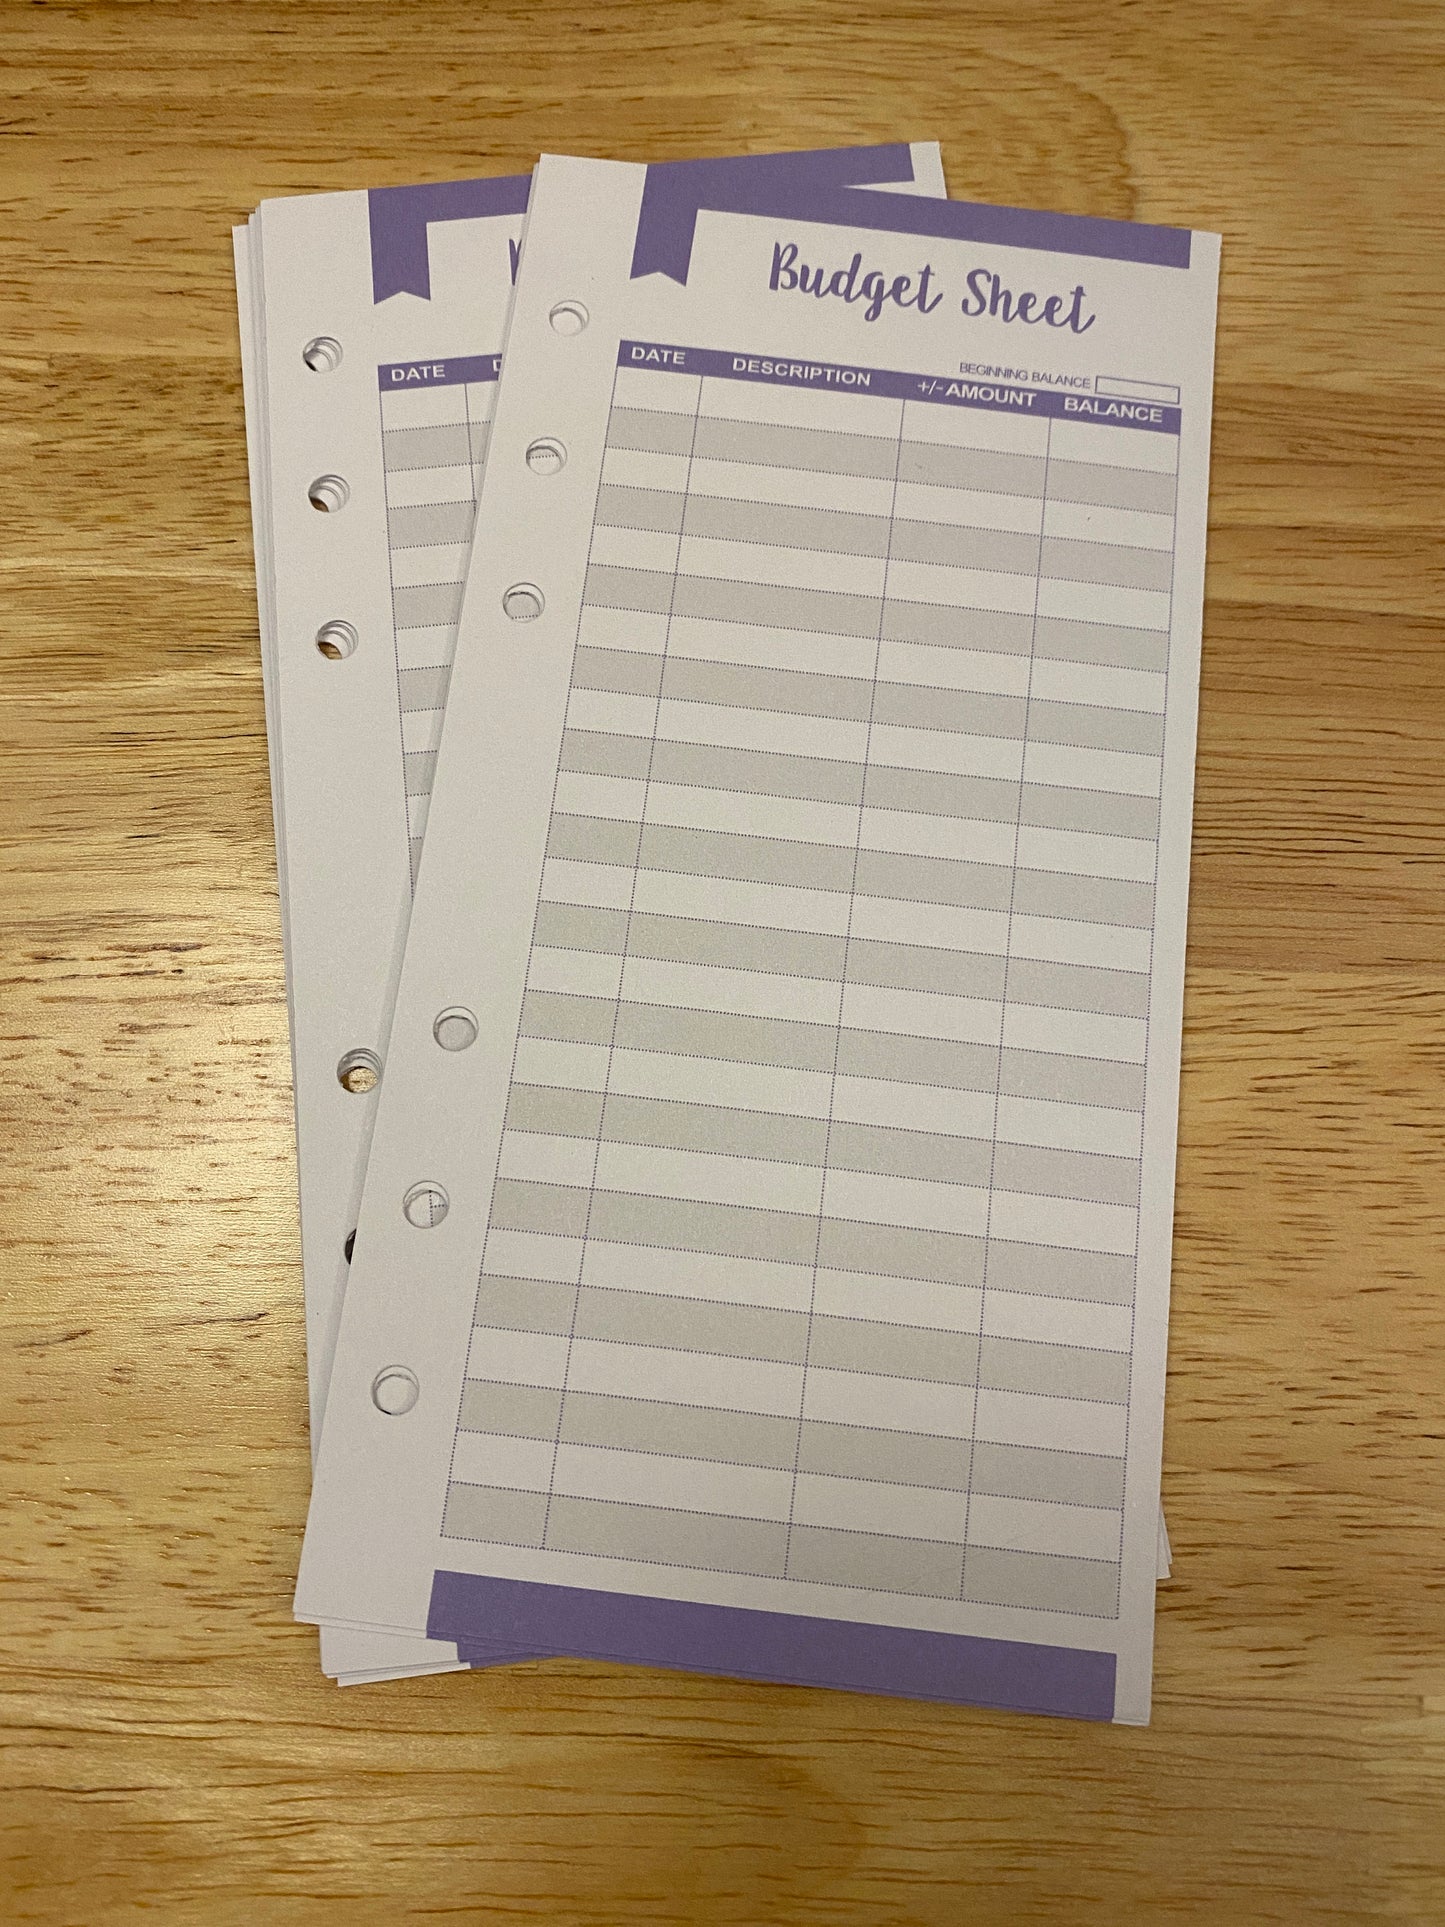 Cash Budgeting Sheets, Budget Insert Trackers for A6 Binders